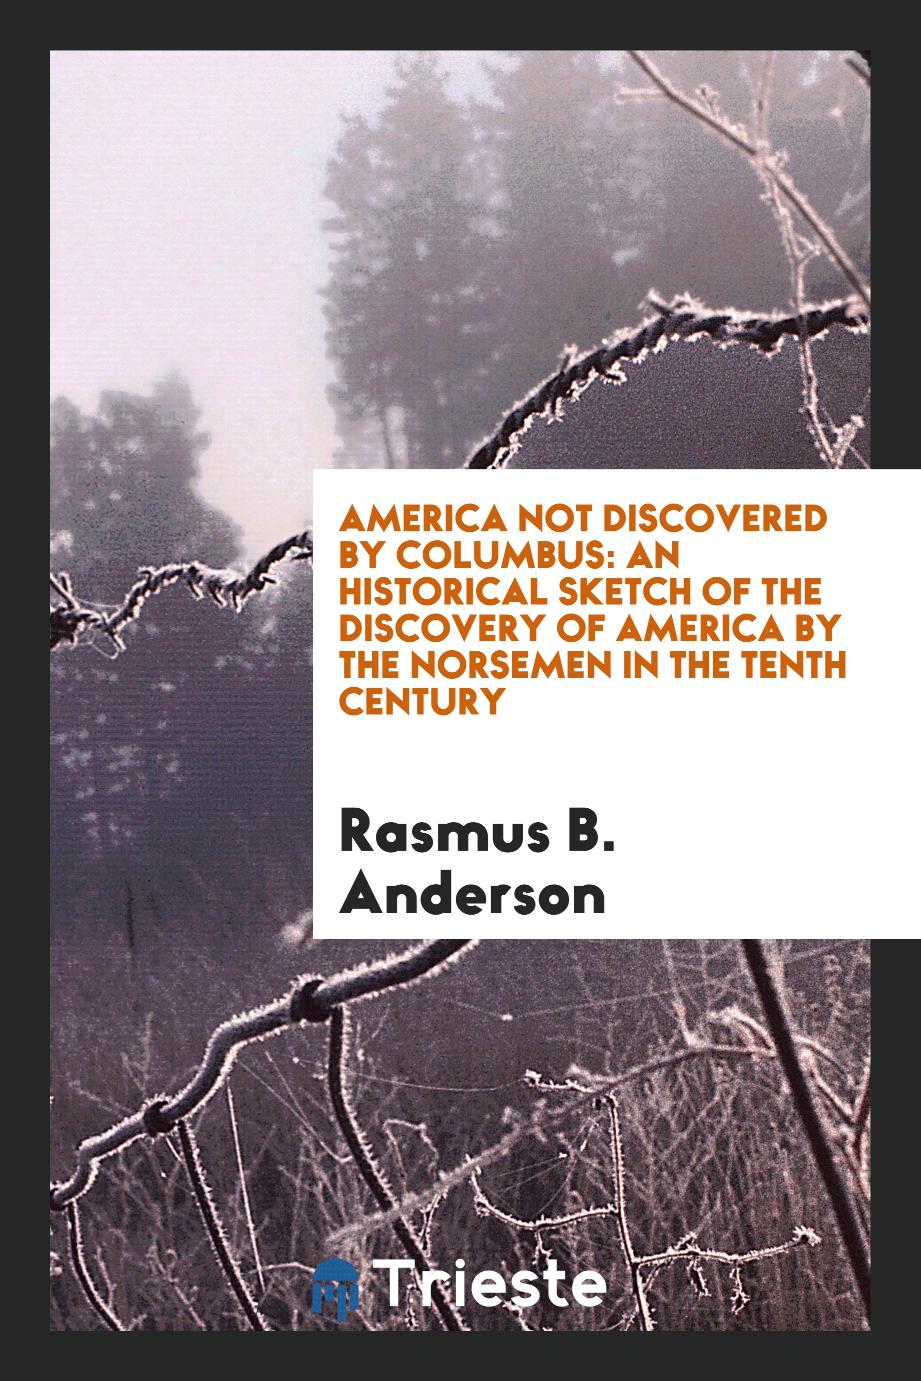 America Not Discovered by Columbus: An Historical Sketch of the Discovery of America by the Norsemen in the Tenth Century